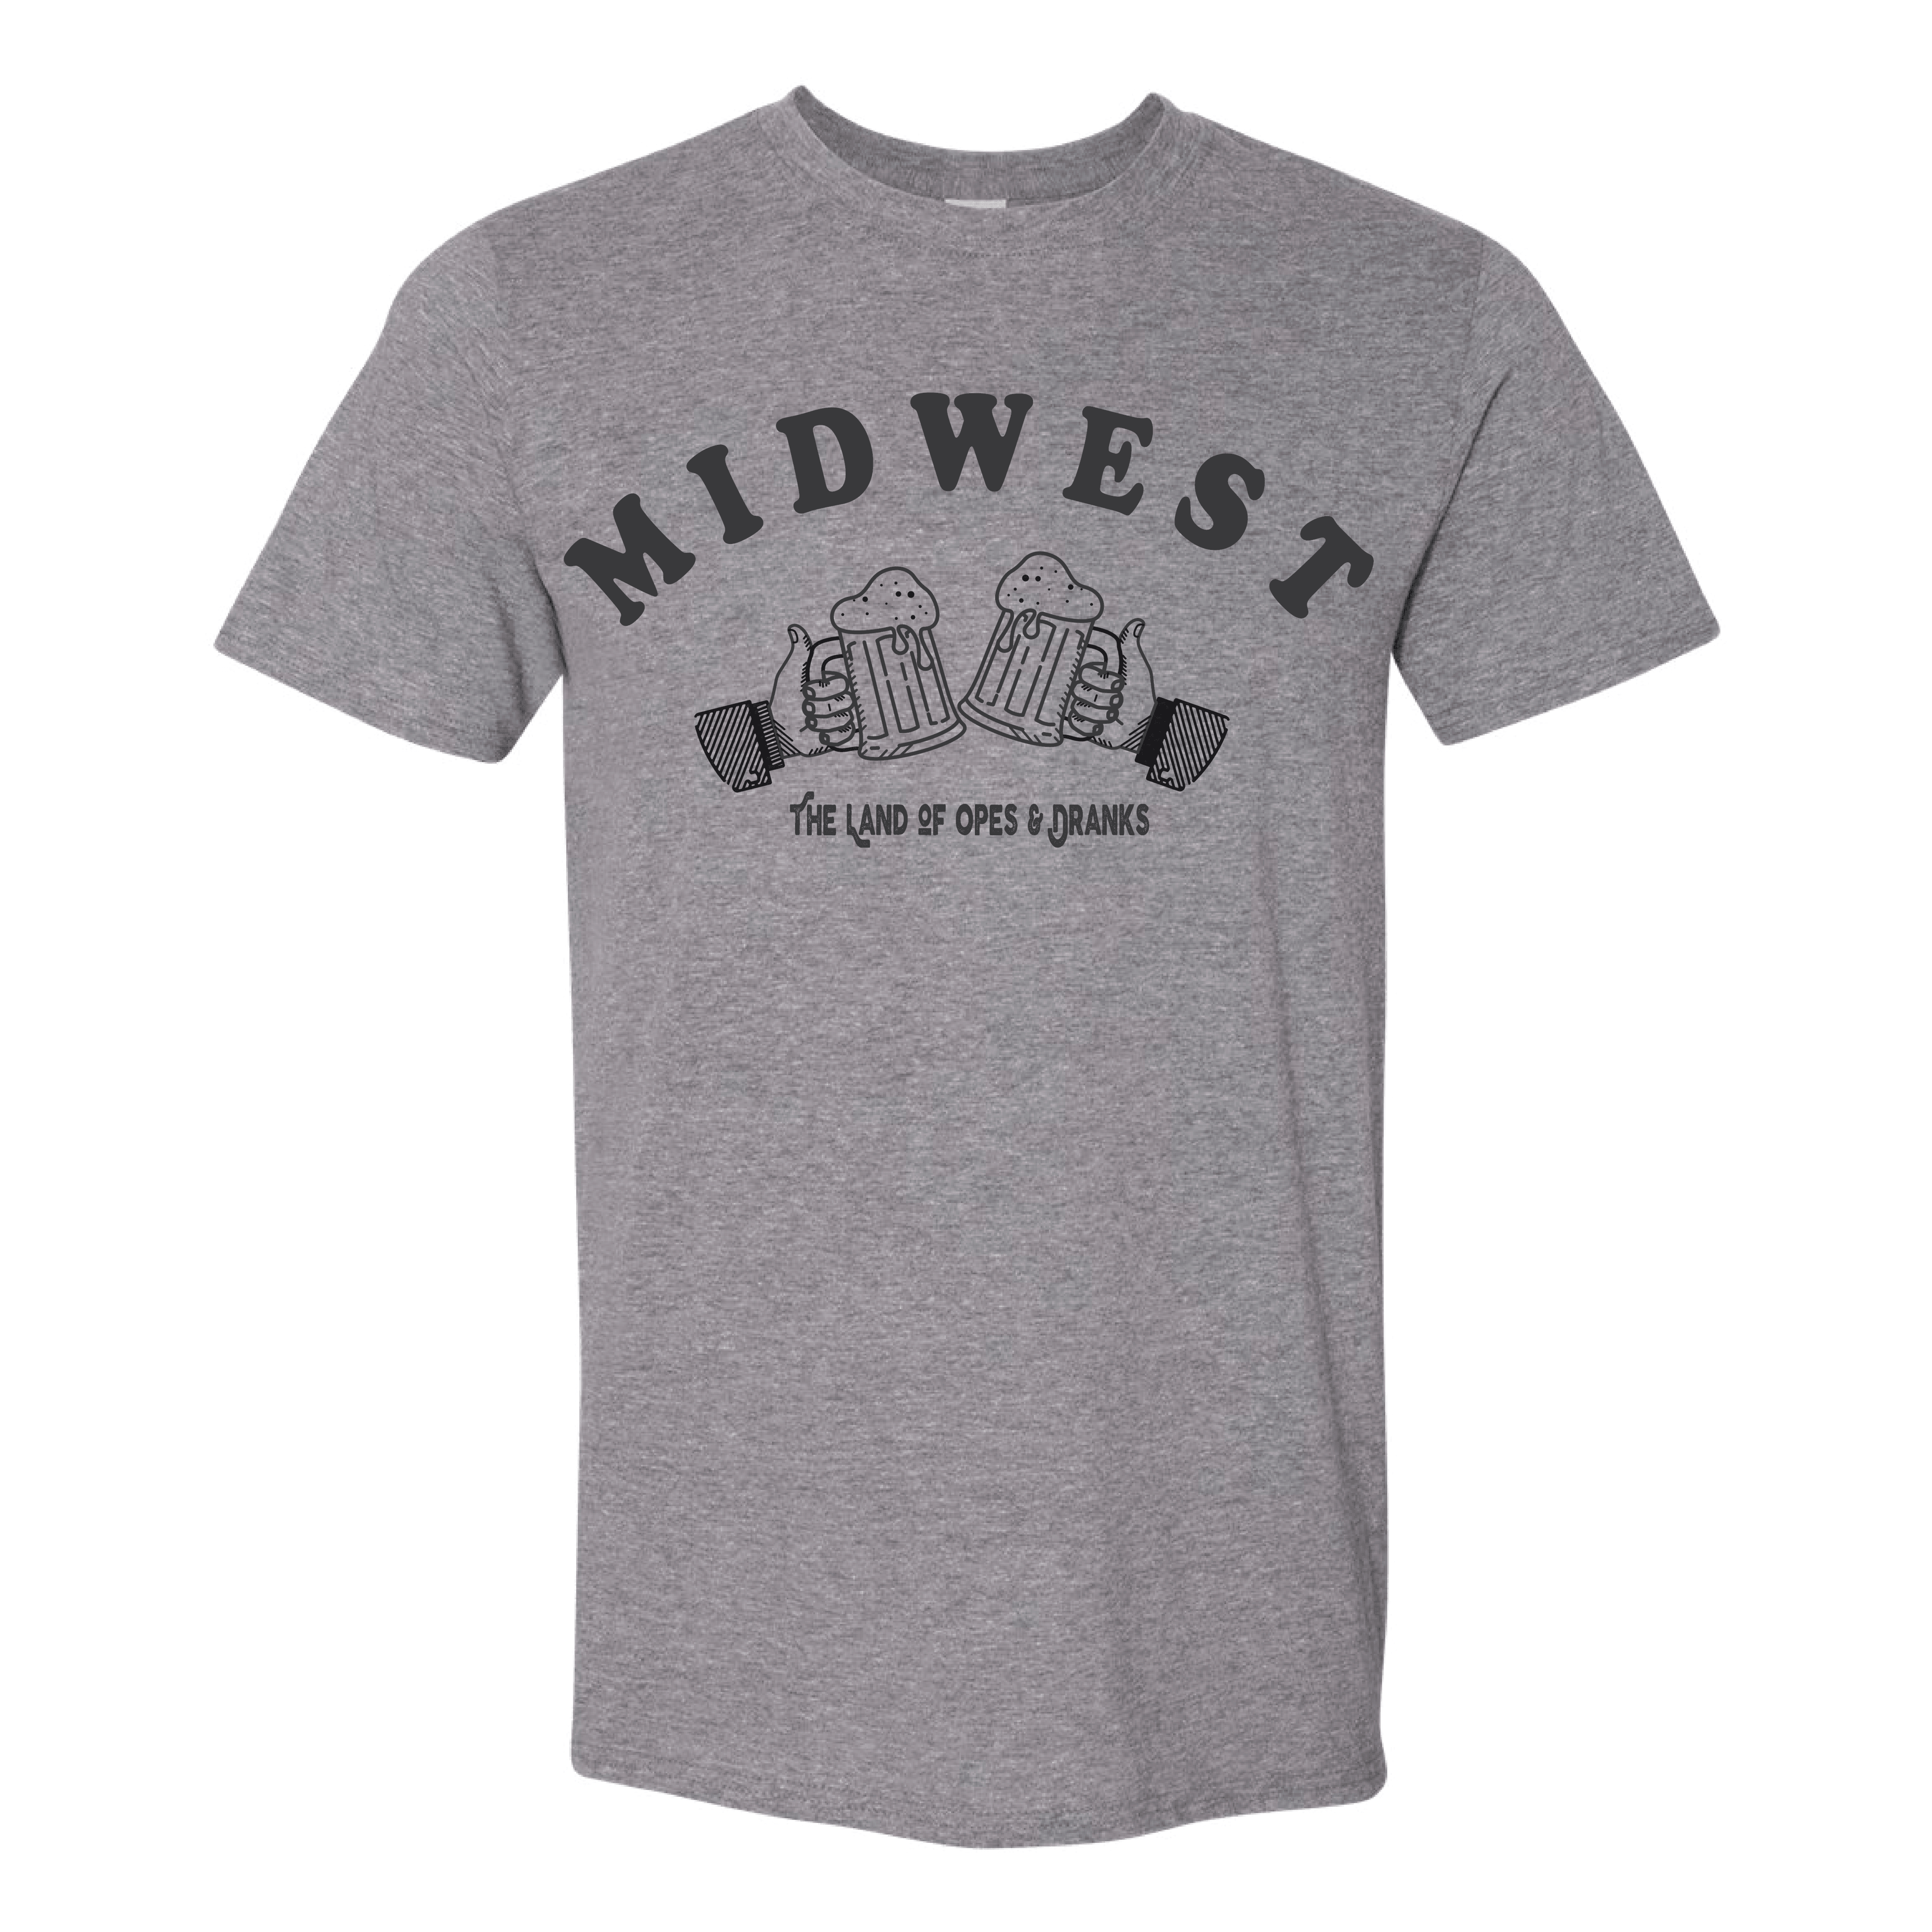 Midwest T-Shirt - Ales to Trails